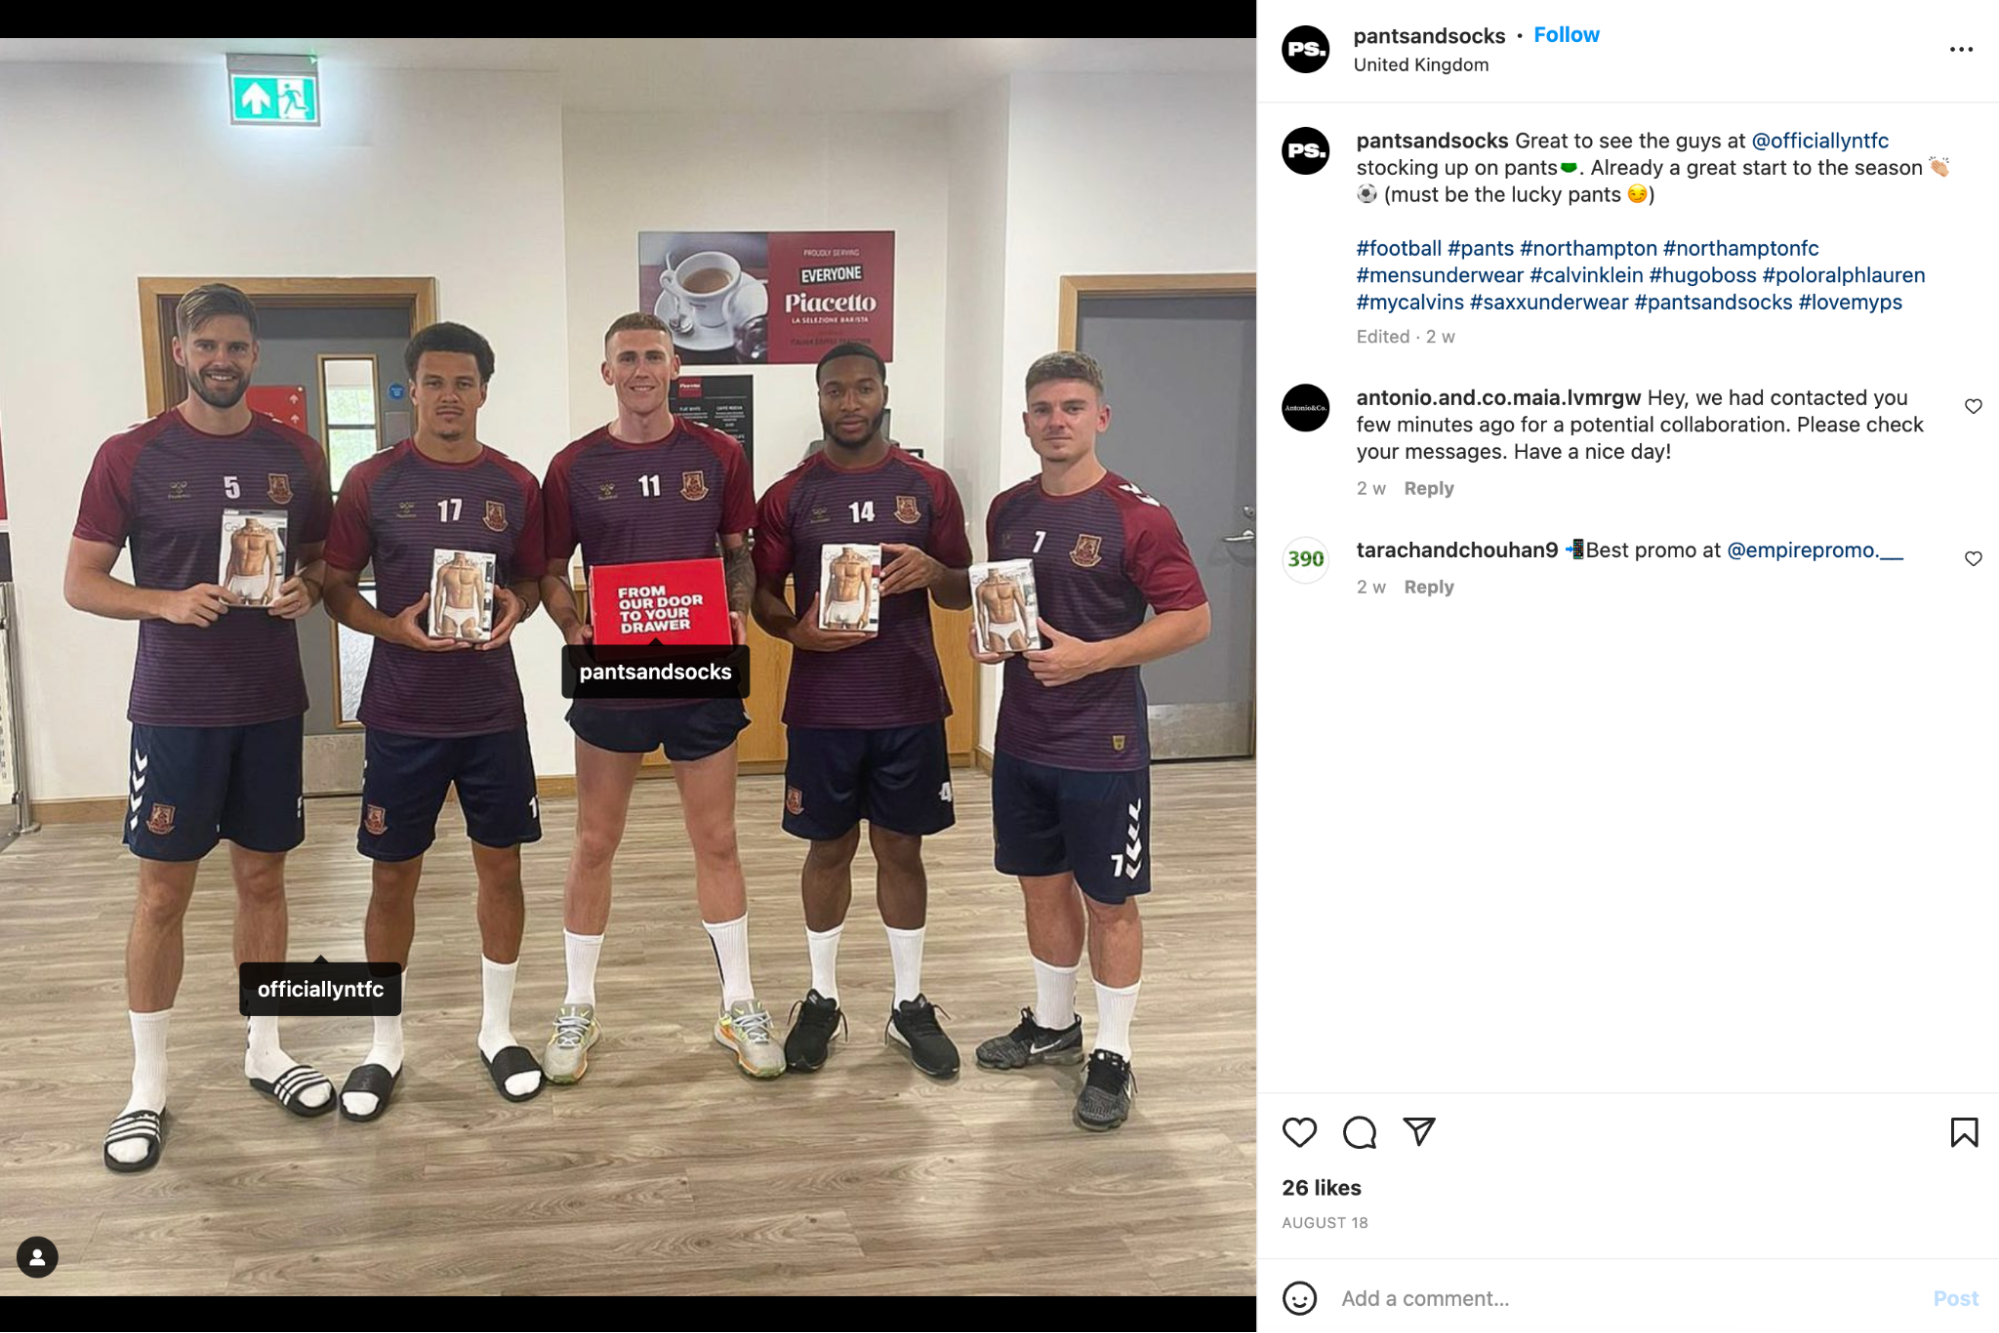 Instagram post showing five football players holding underwear boxes from Pants and Socks.